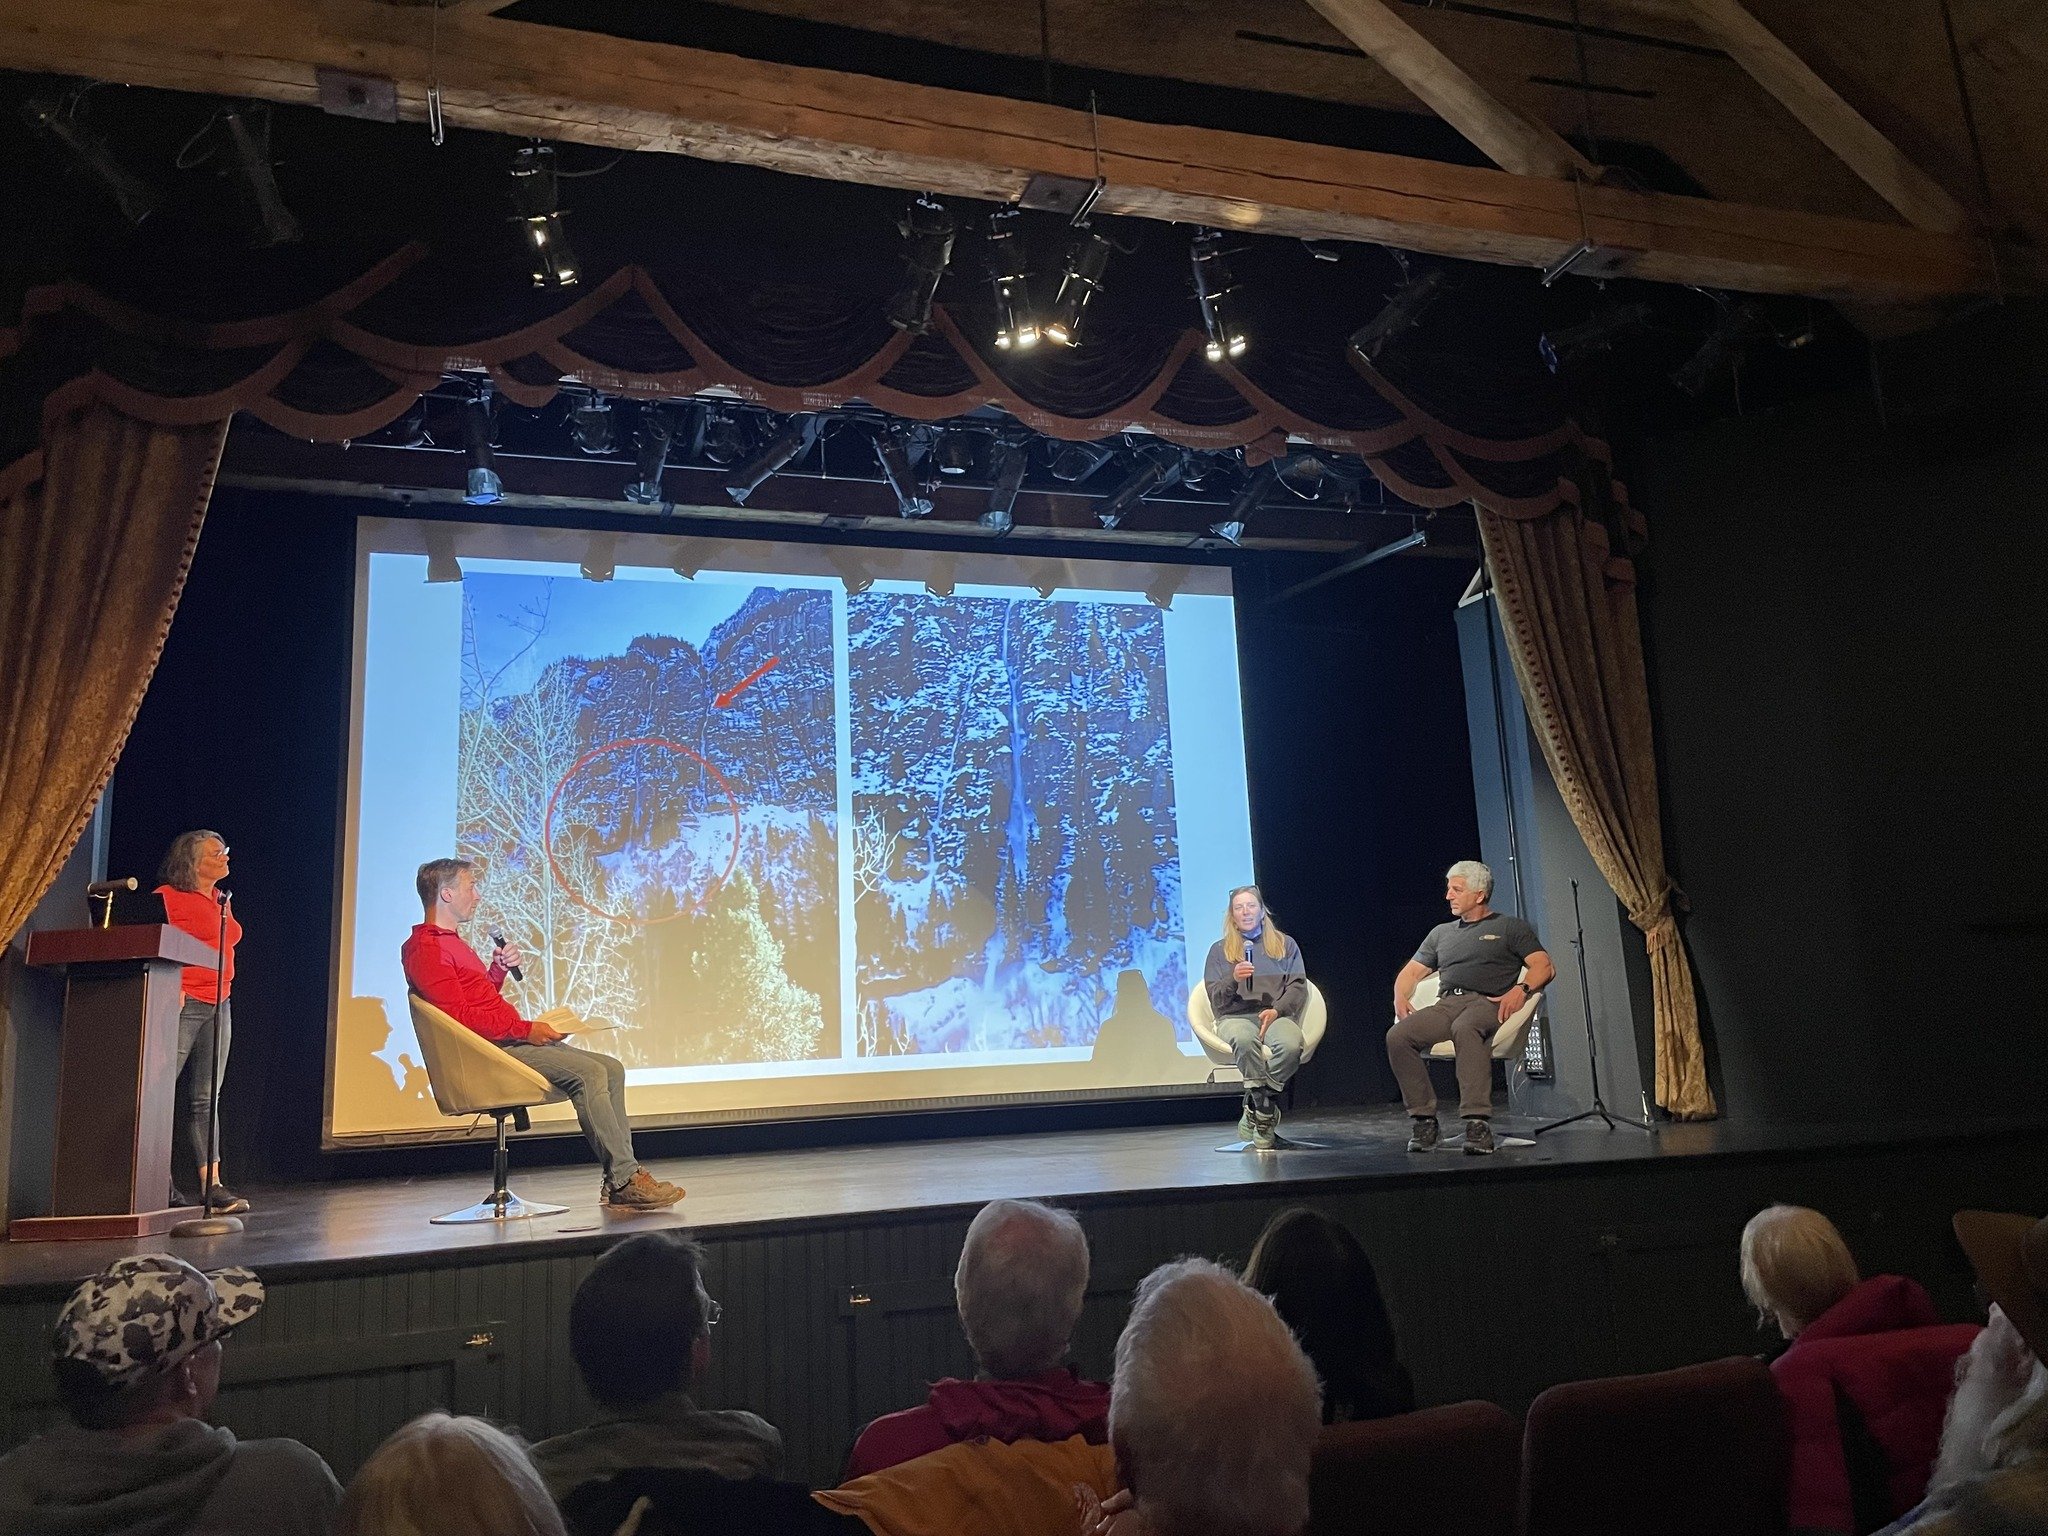 Many thanks to all the community members who came out to support our movie night and OMRT fundraiser on Saturday at the @wrightoperahouse! 

We had over 65 people in the audience to watch @wheretheropeends, followed by a locals' Q&amp;A session with 